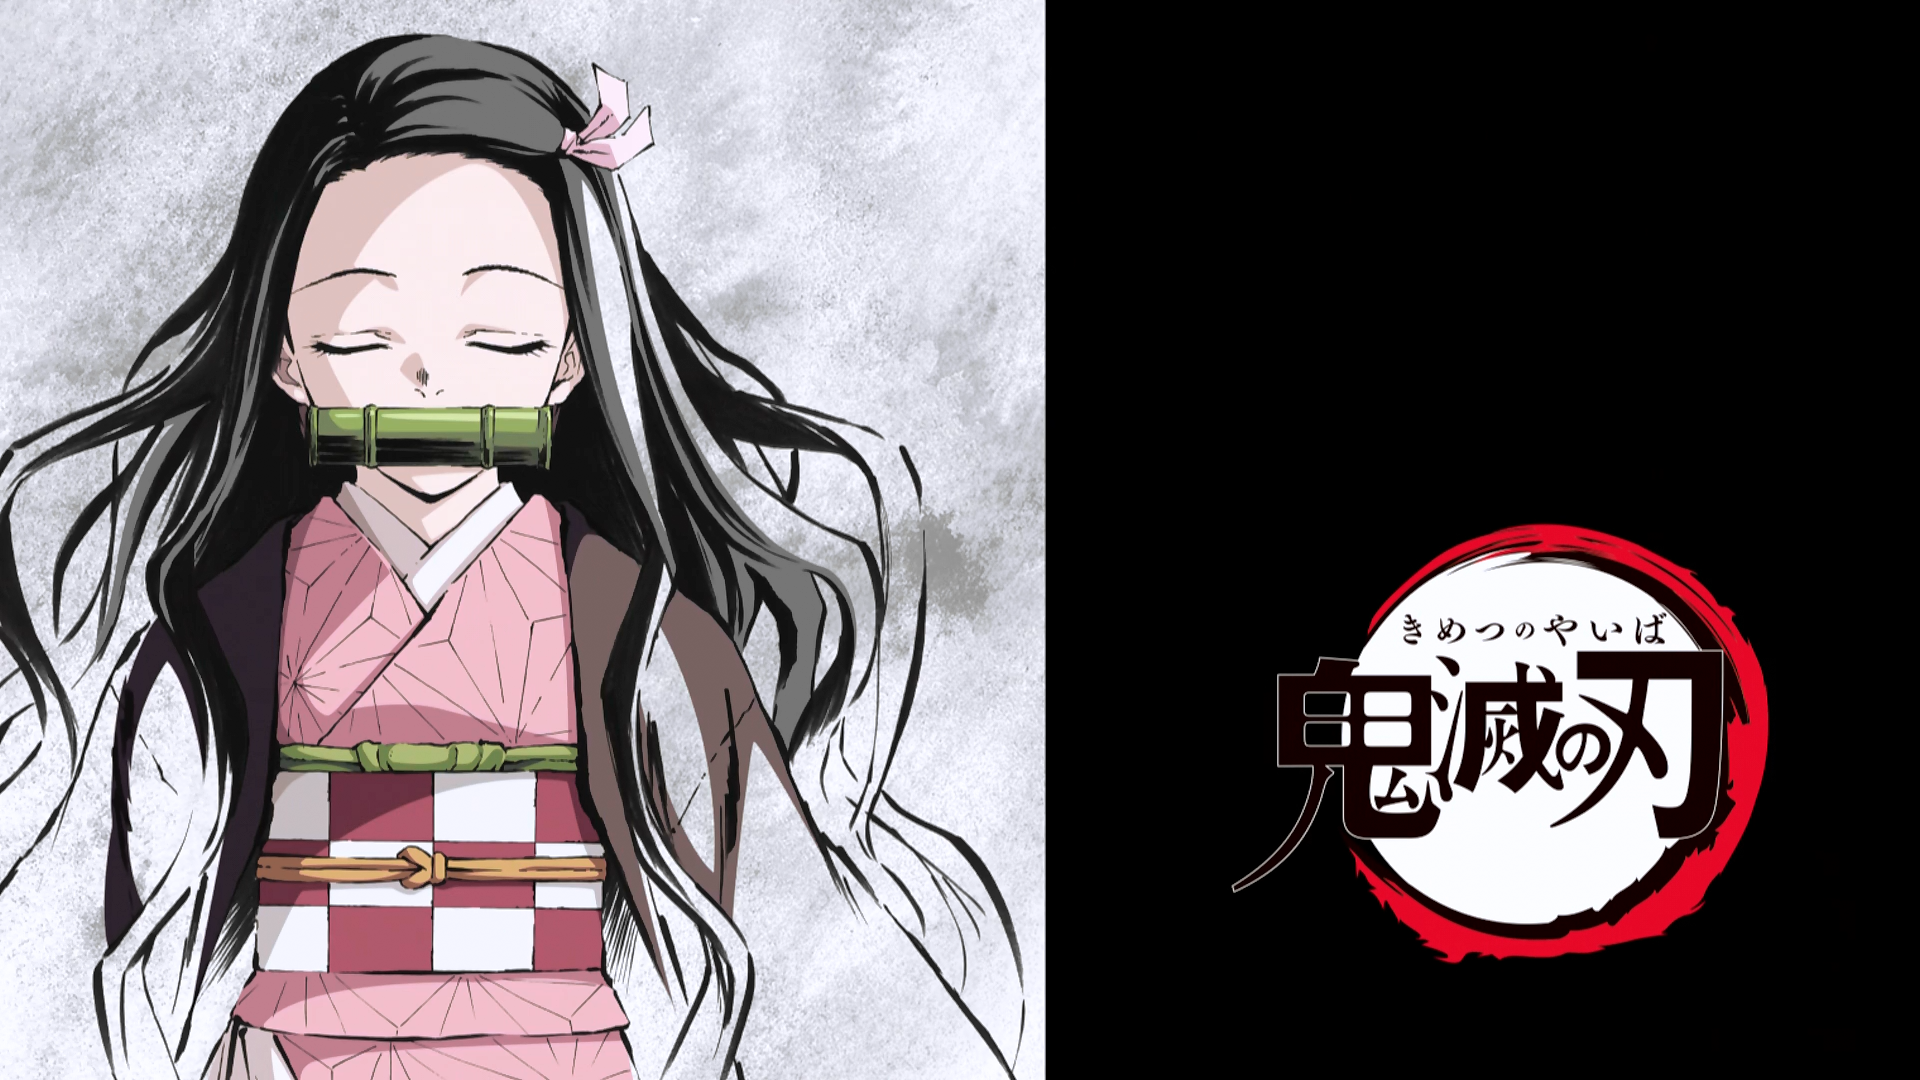 Demon Slayer: Kimetsu no Yaiba anime has 22 episodes discharged till now,  it is listed to have 26 episodes and the latest one was rel…